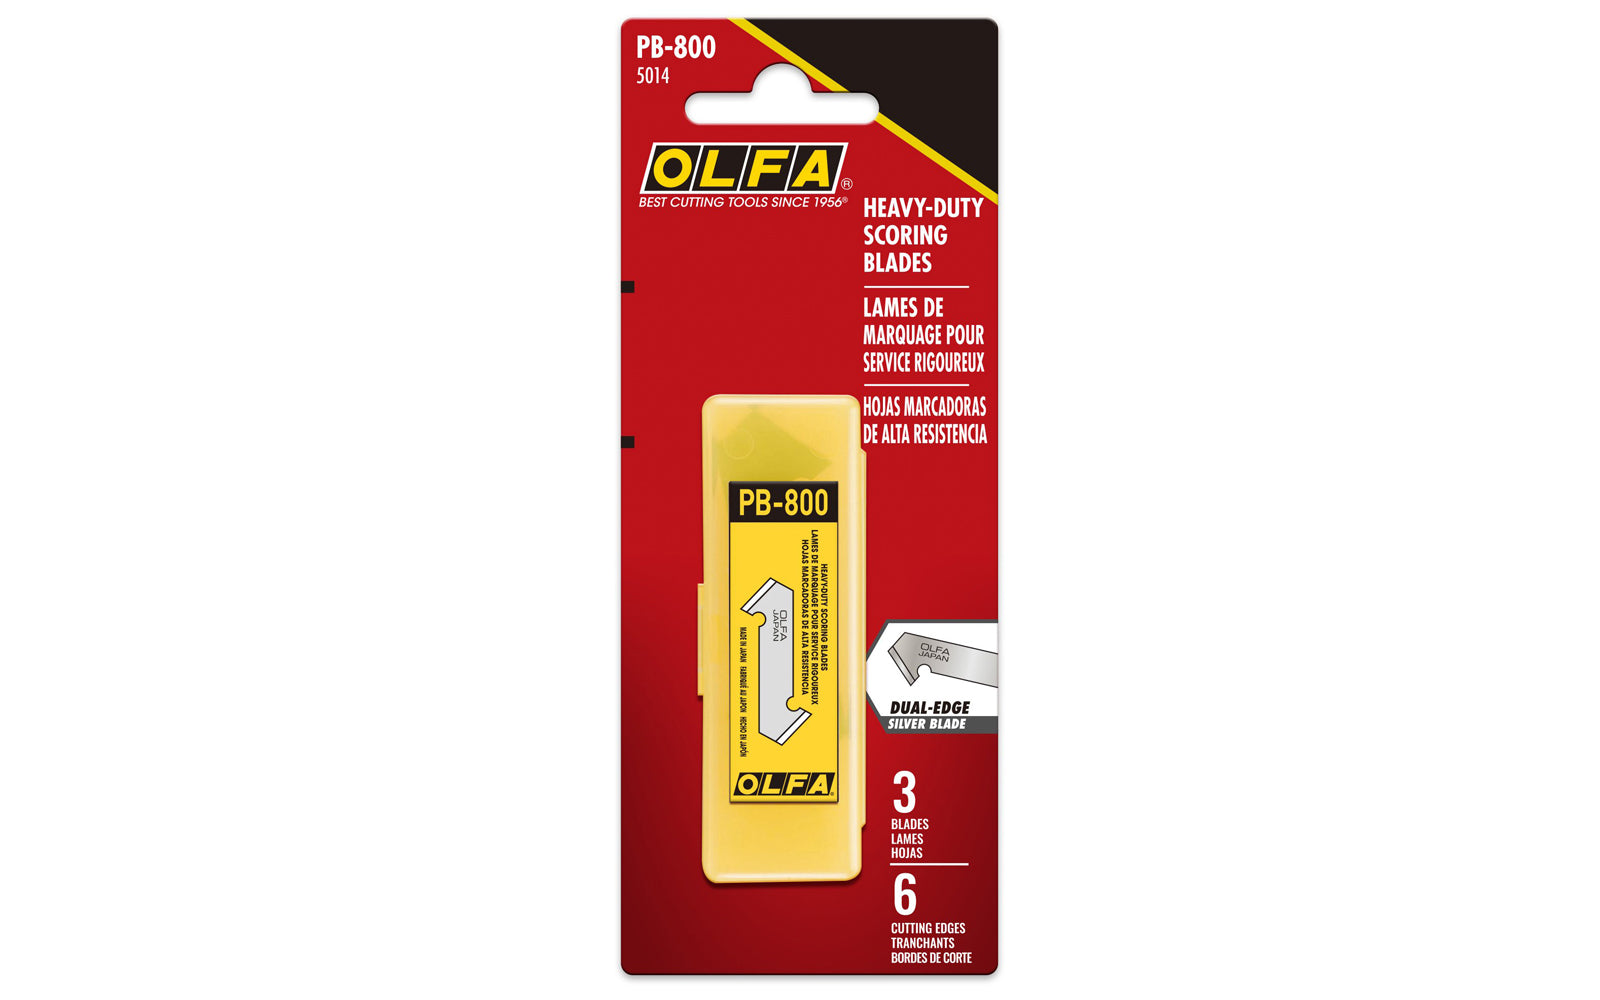 These Olfa "PB-800" Plastic & Laminate Cutter Blades are crafted from premium tungsten steel for extreme toughness & durability. The expertly honed cutting edge creates a fine score line to cleanly snap plastics & laminates with ease. Olfa "PB-800" Replacement Scoring Blades - 3 Pack. 091511600223. Made in Japan